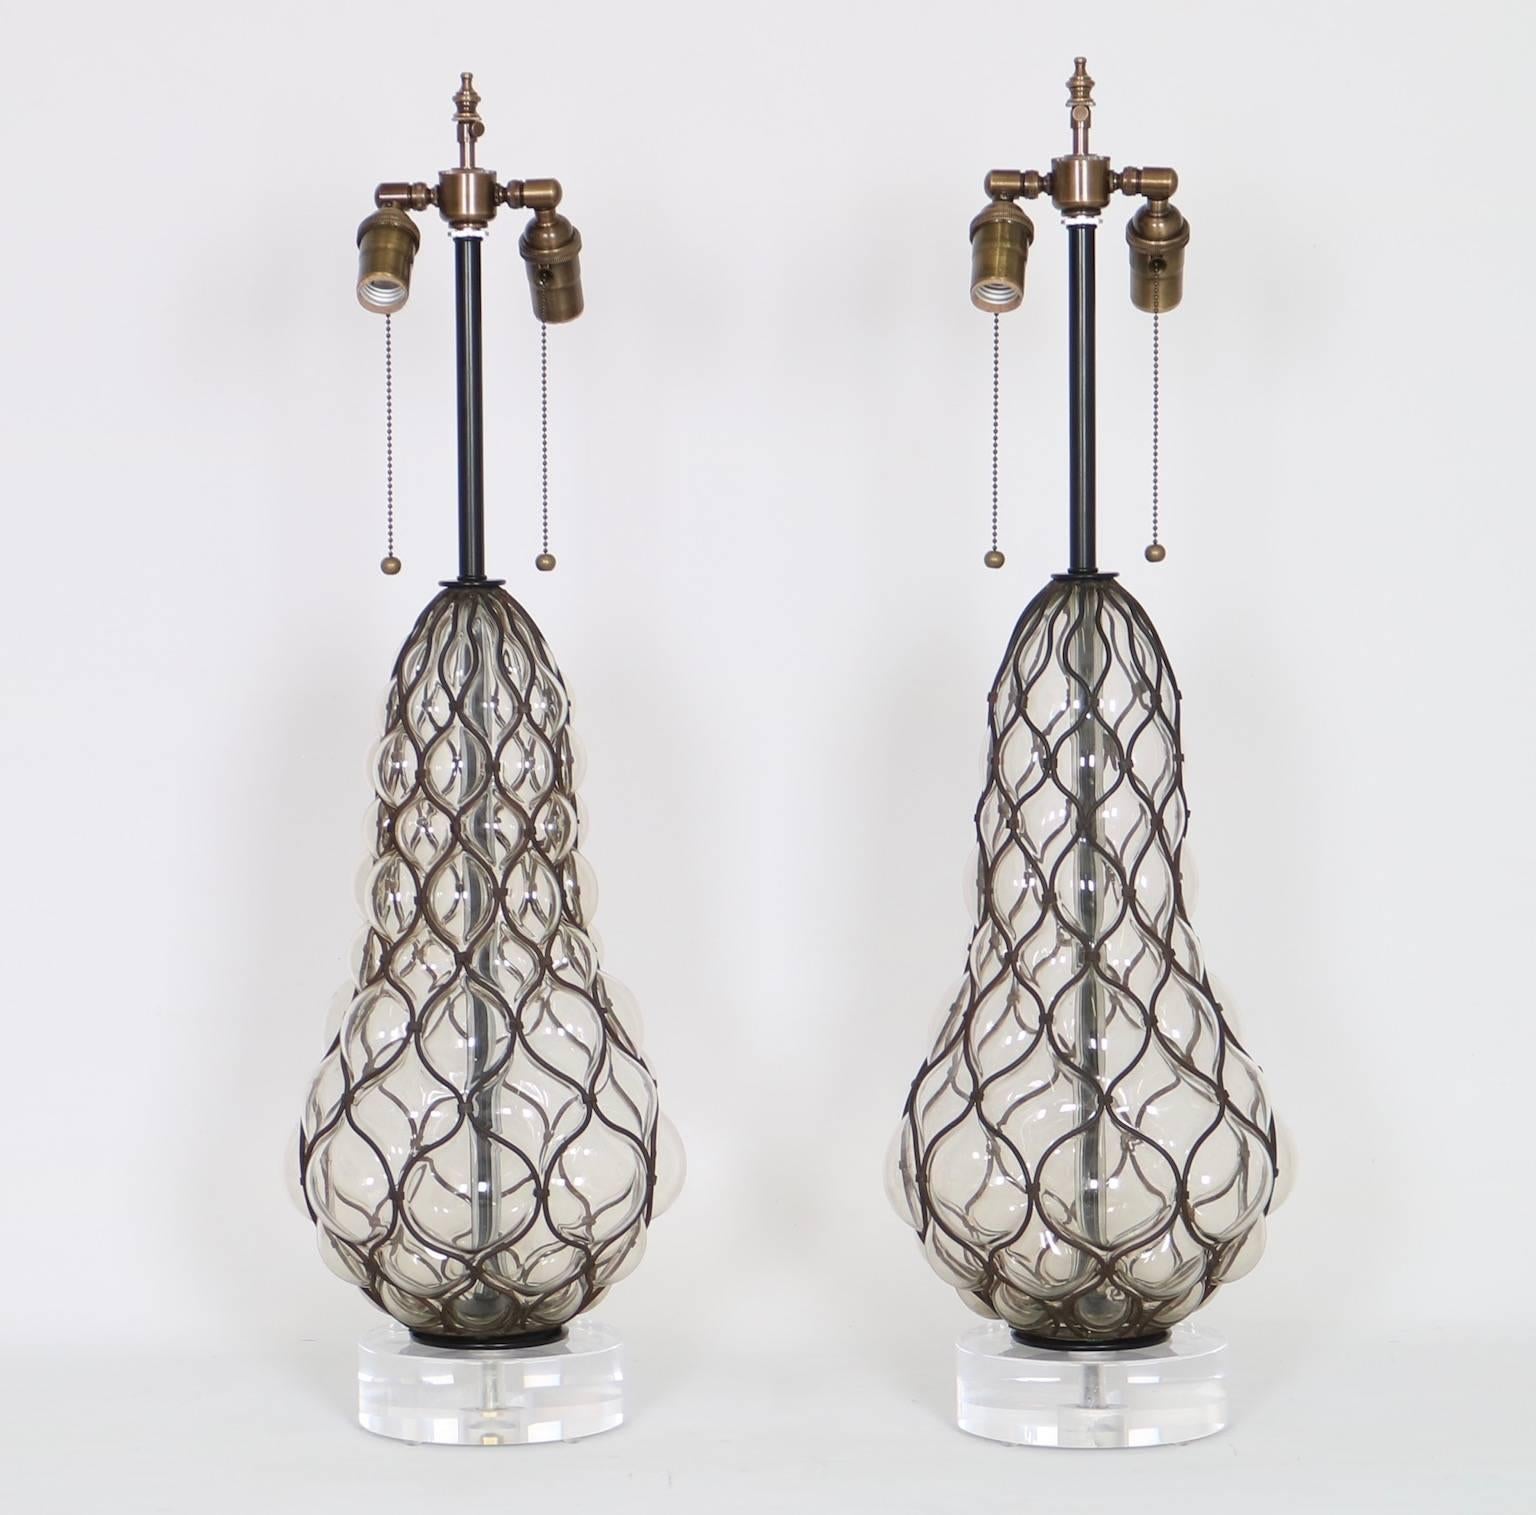 Marbro Hollywood Regency clear Murano glass lamps with iron caging mounted on Lucite bases. Fully restored with all new wiring and hardware including a double socket cluster. In excellent vintage condition having wear consistent with age and